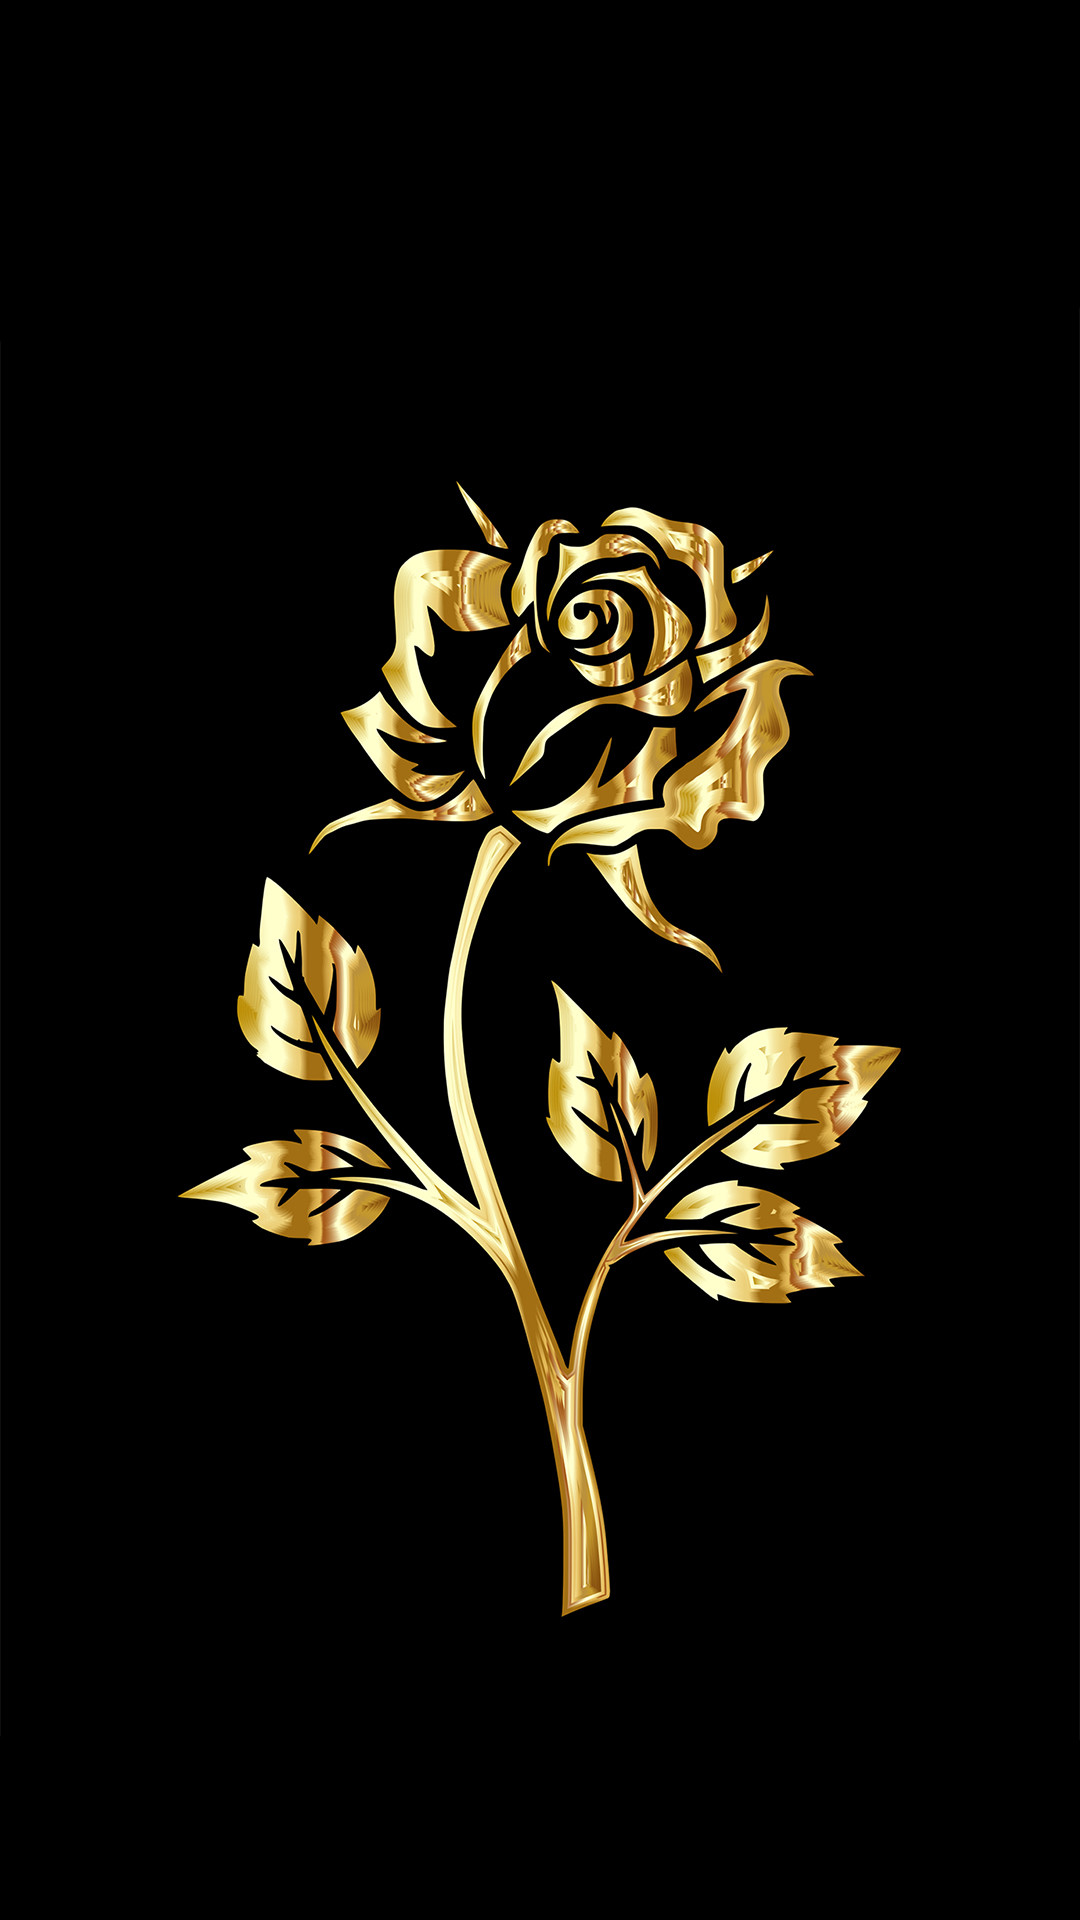 1080x1920 Downloaded from Girly Wallpapers. http://itunes.apple.com/app